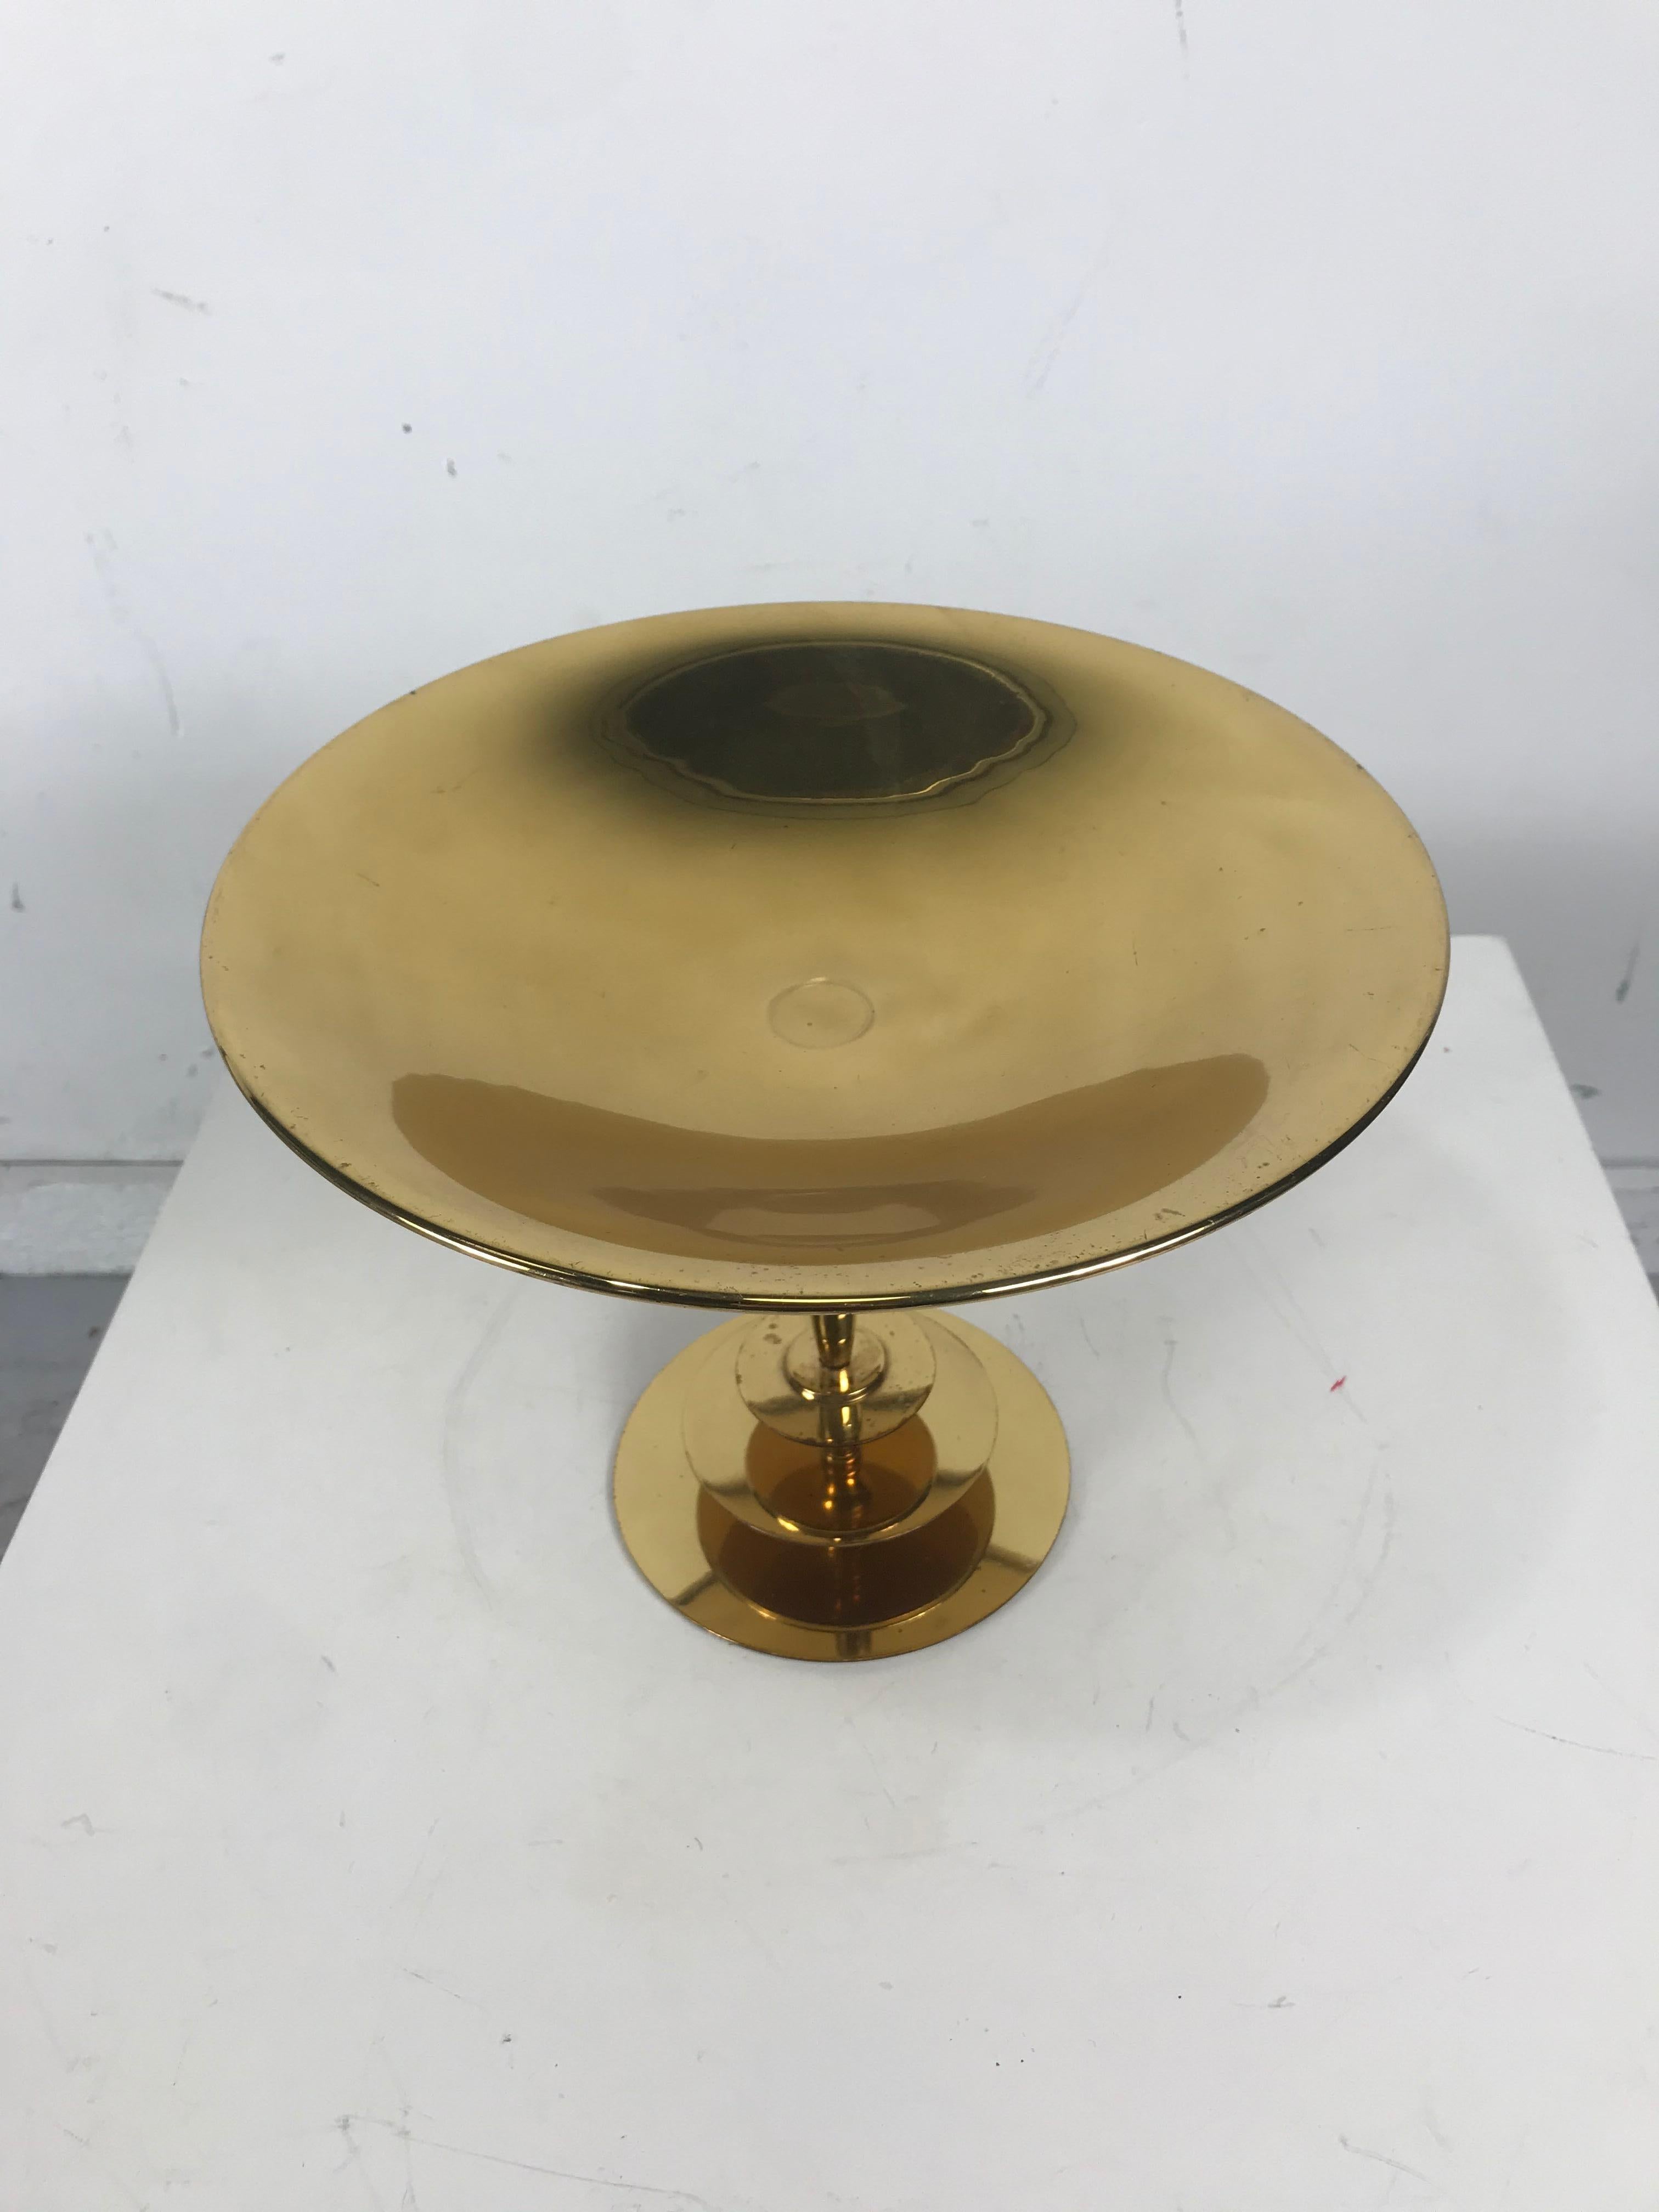 Stunning Art Deco Brass Compote/Centerpiece by Albert Gustav Bunge,,Germany.,,Reminiscent of classic designs by Tommi Parzinger,,  Karl Hagenauer